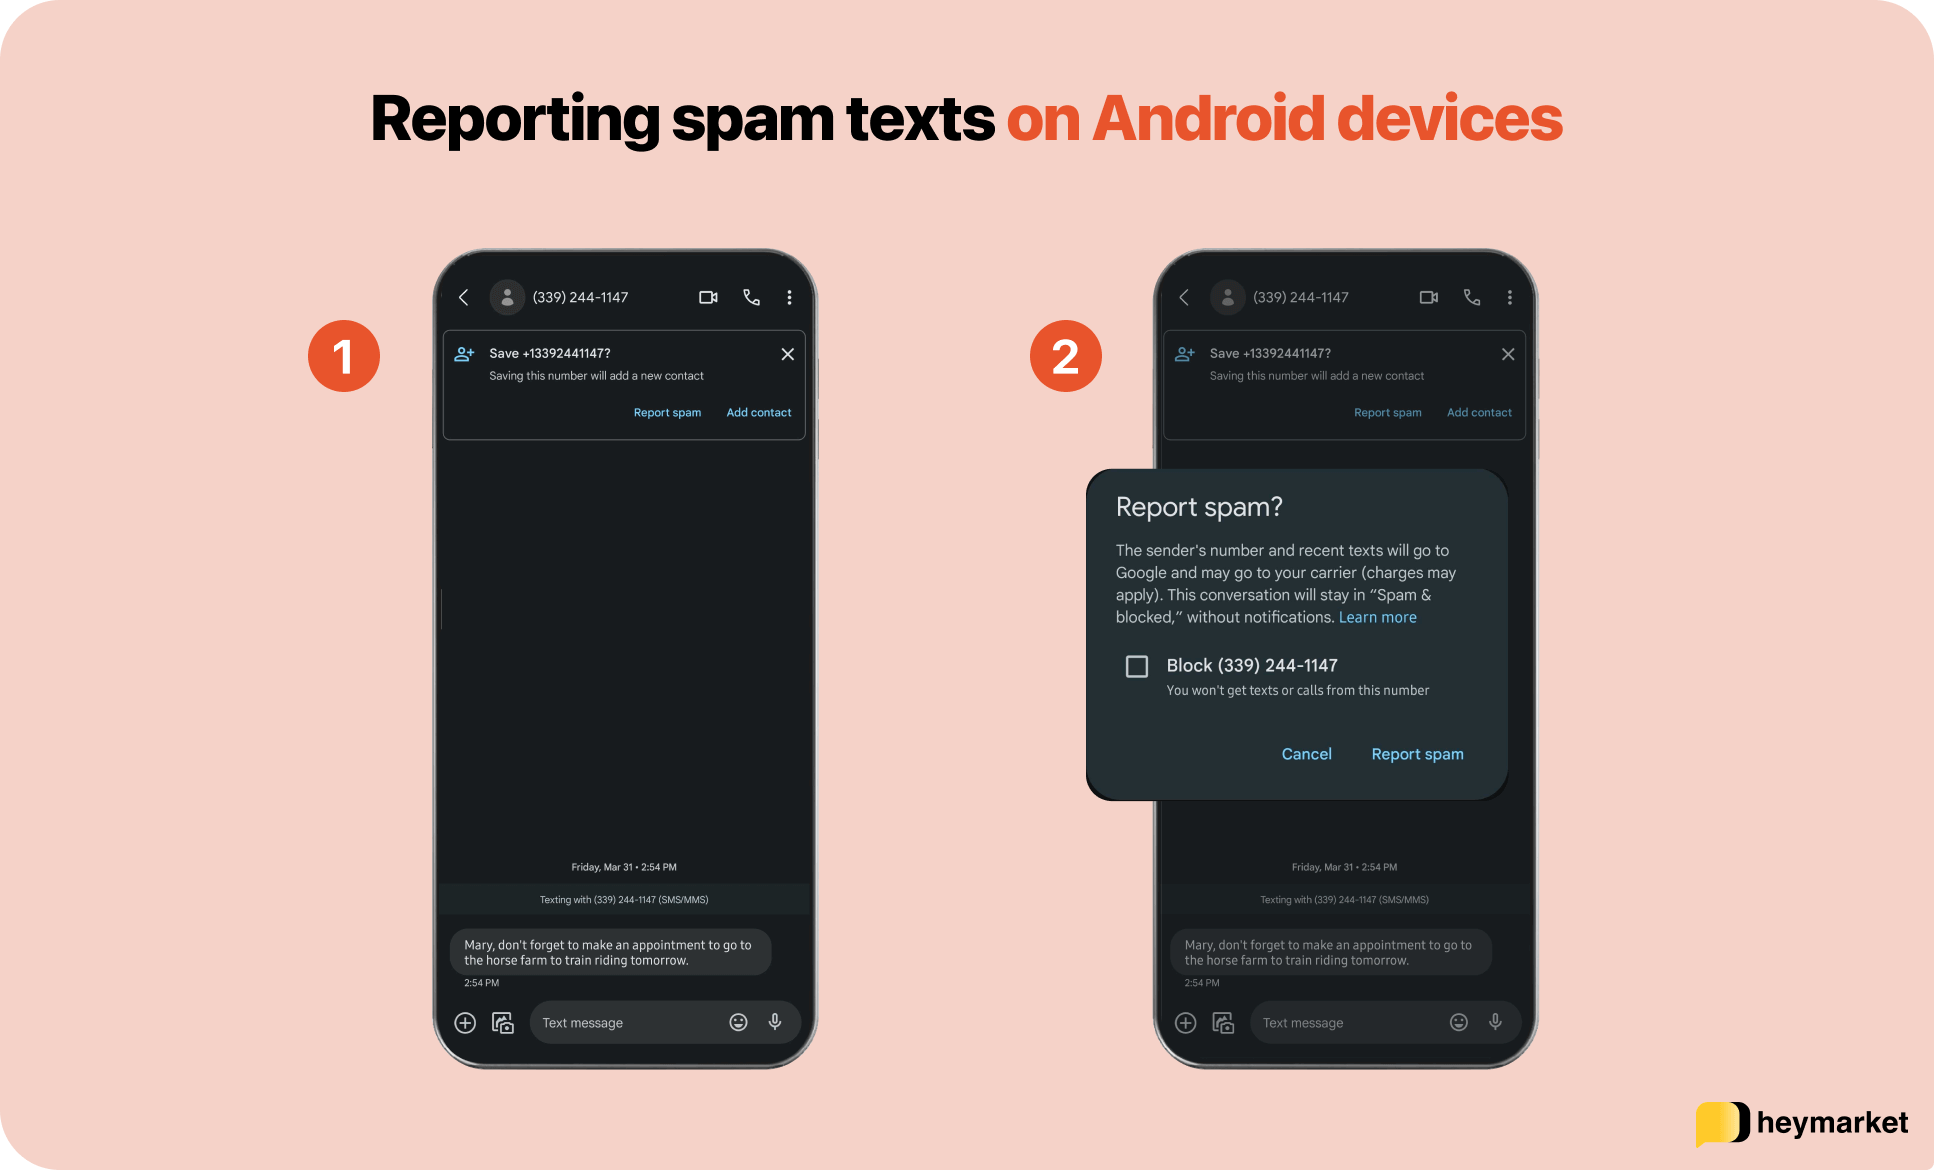 Steps for reporting spam texts on Android